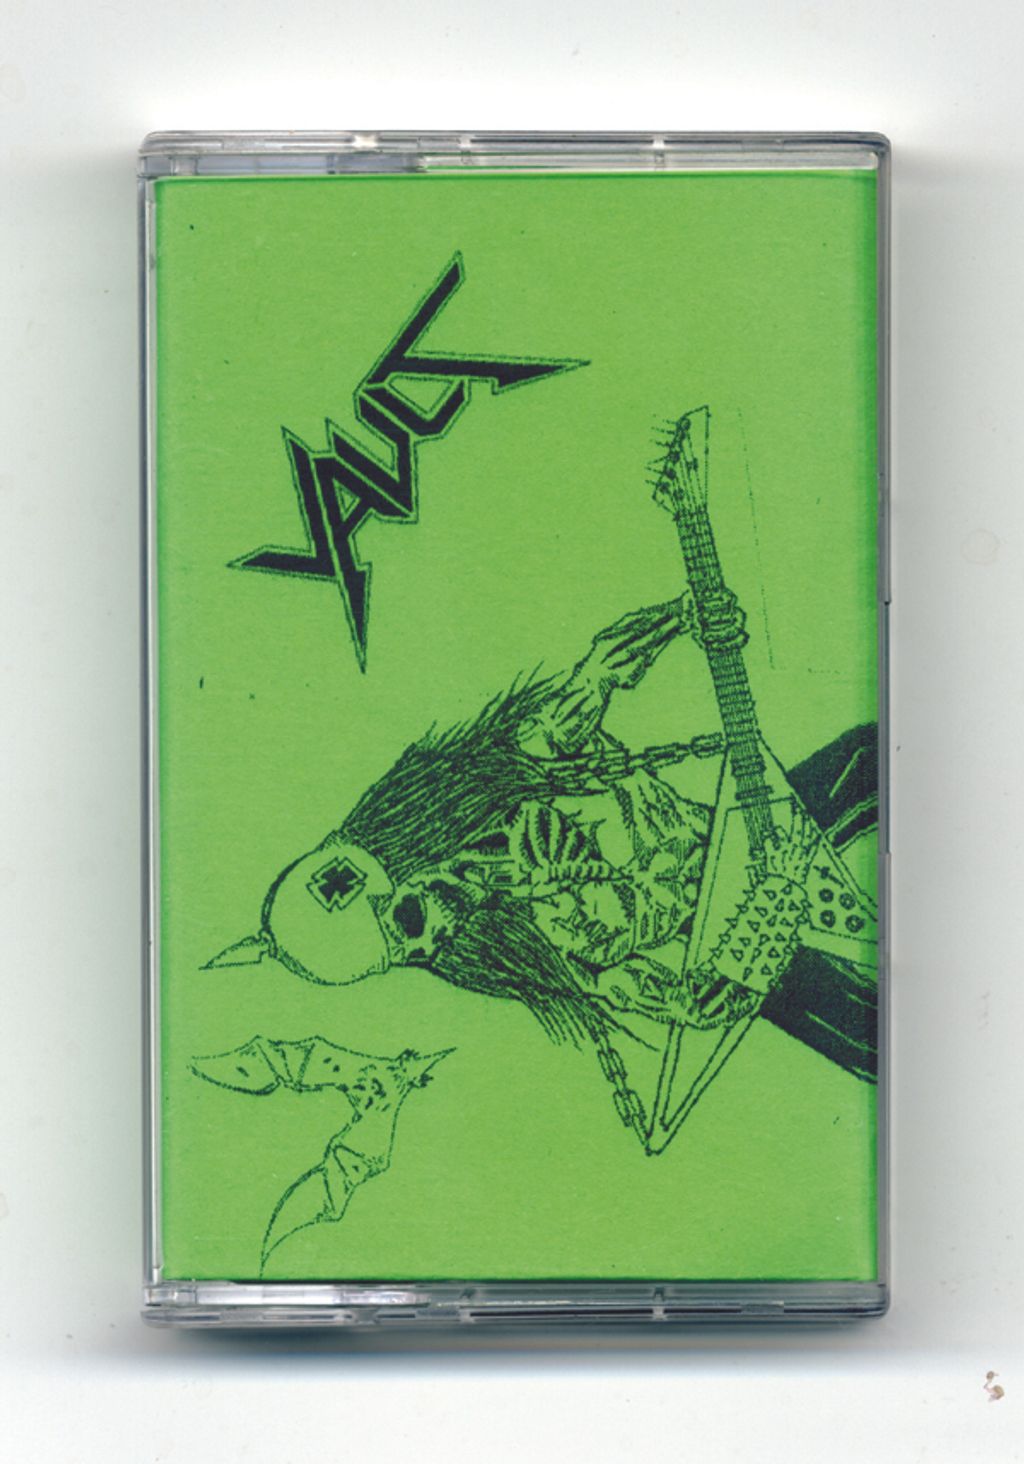 vault wfw 2nd pressing green cover.jpg